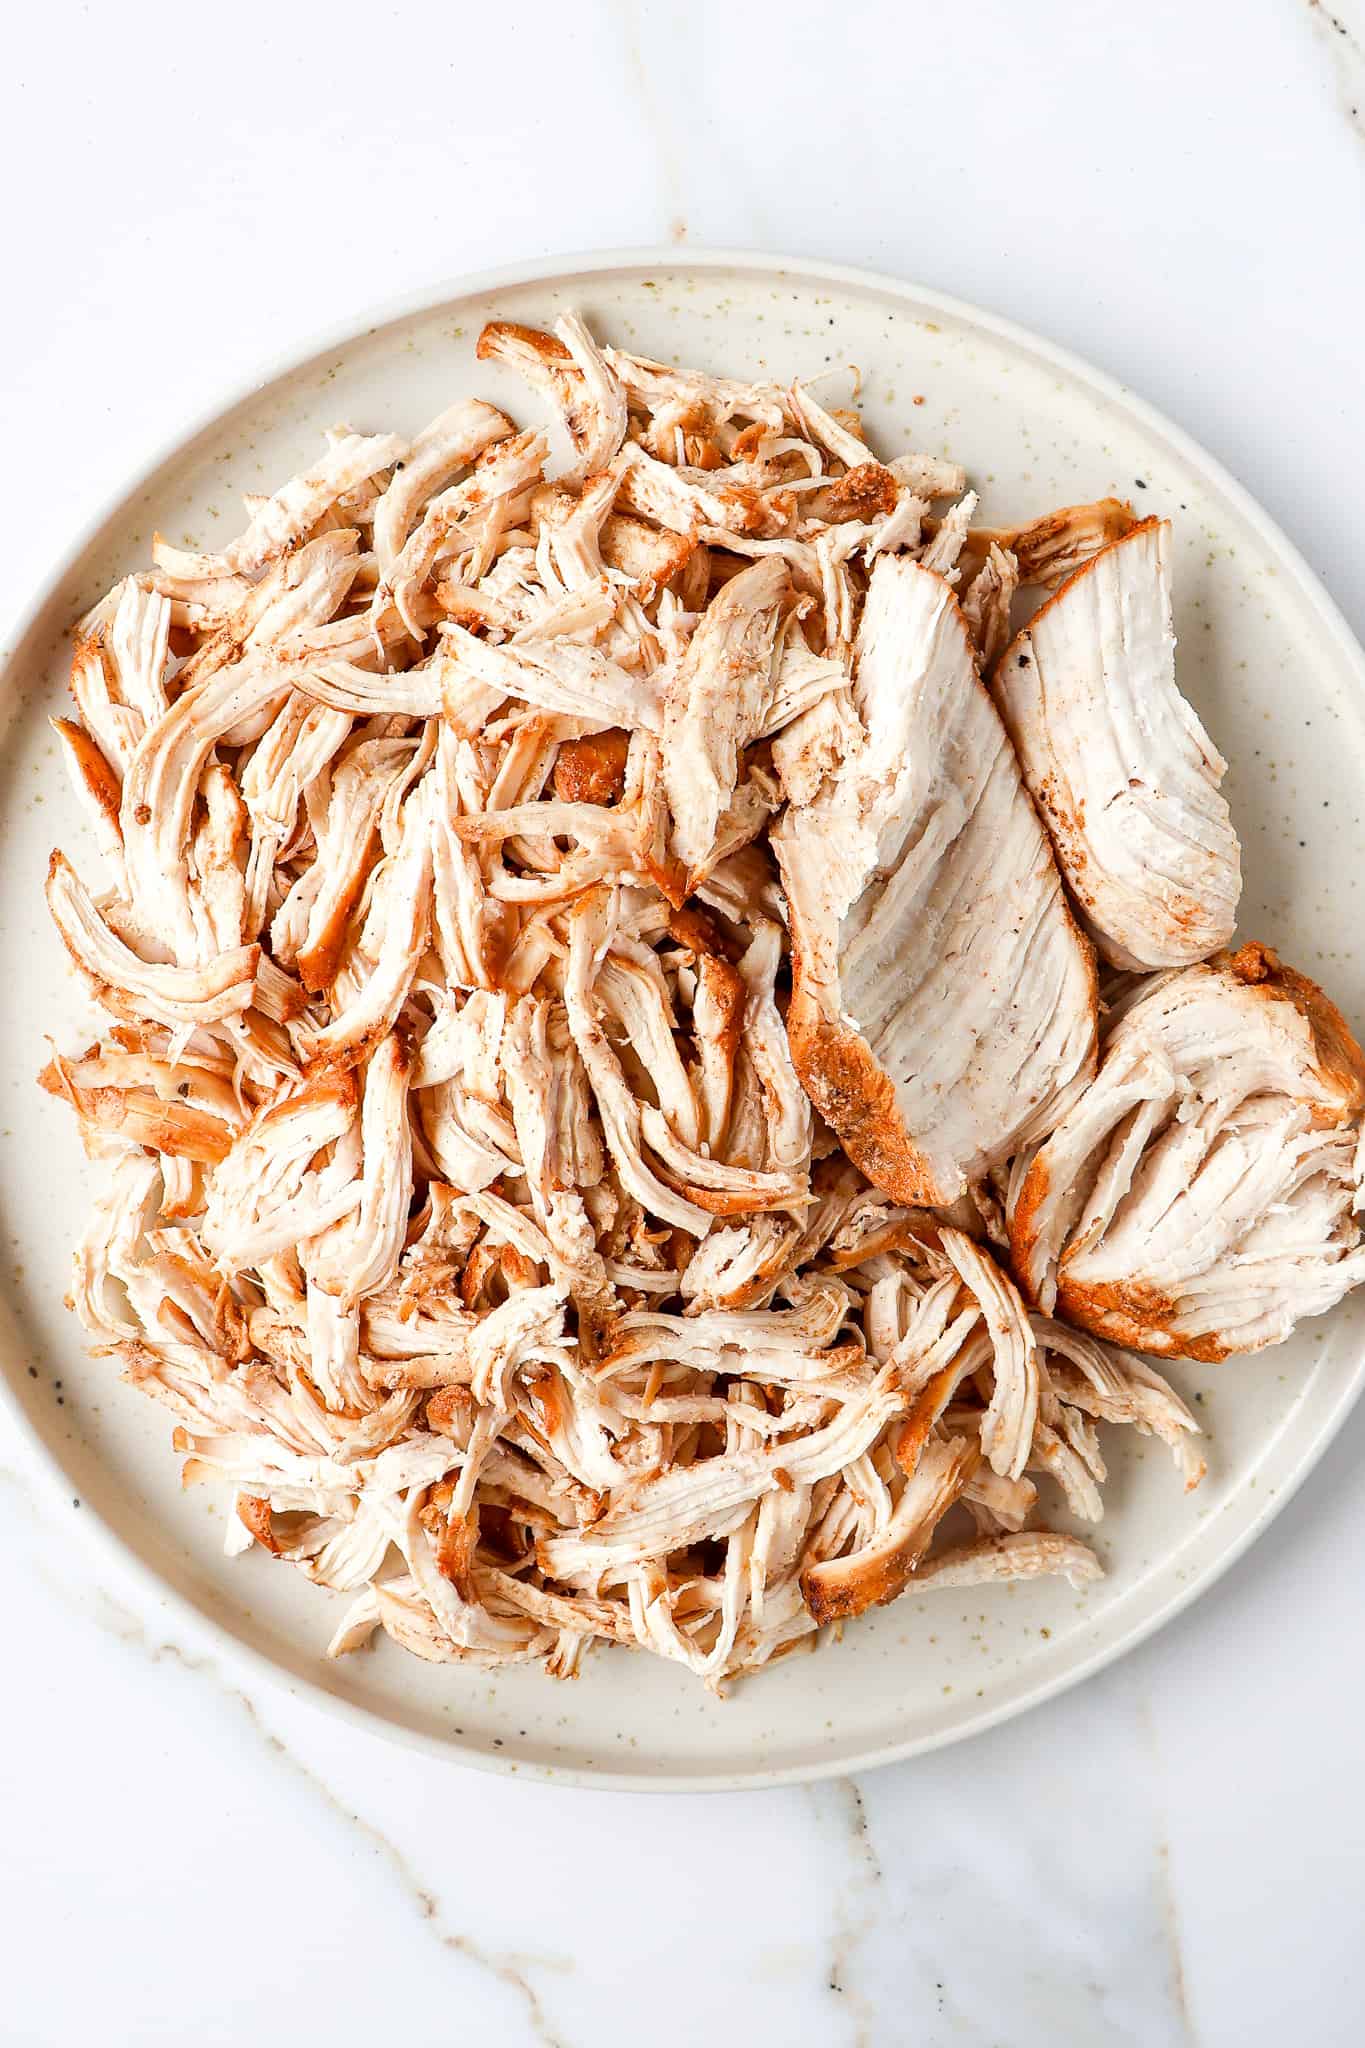 Chicken being shredded on a plate.